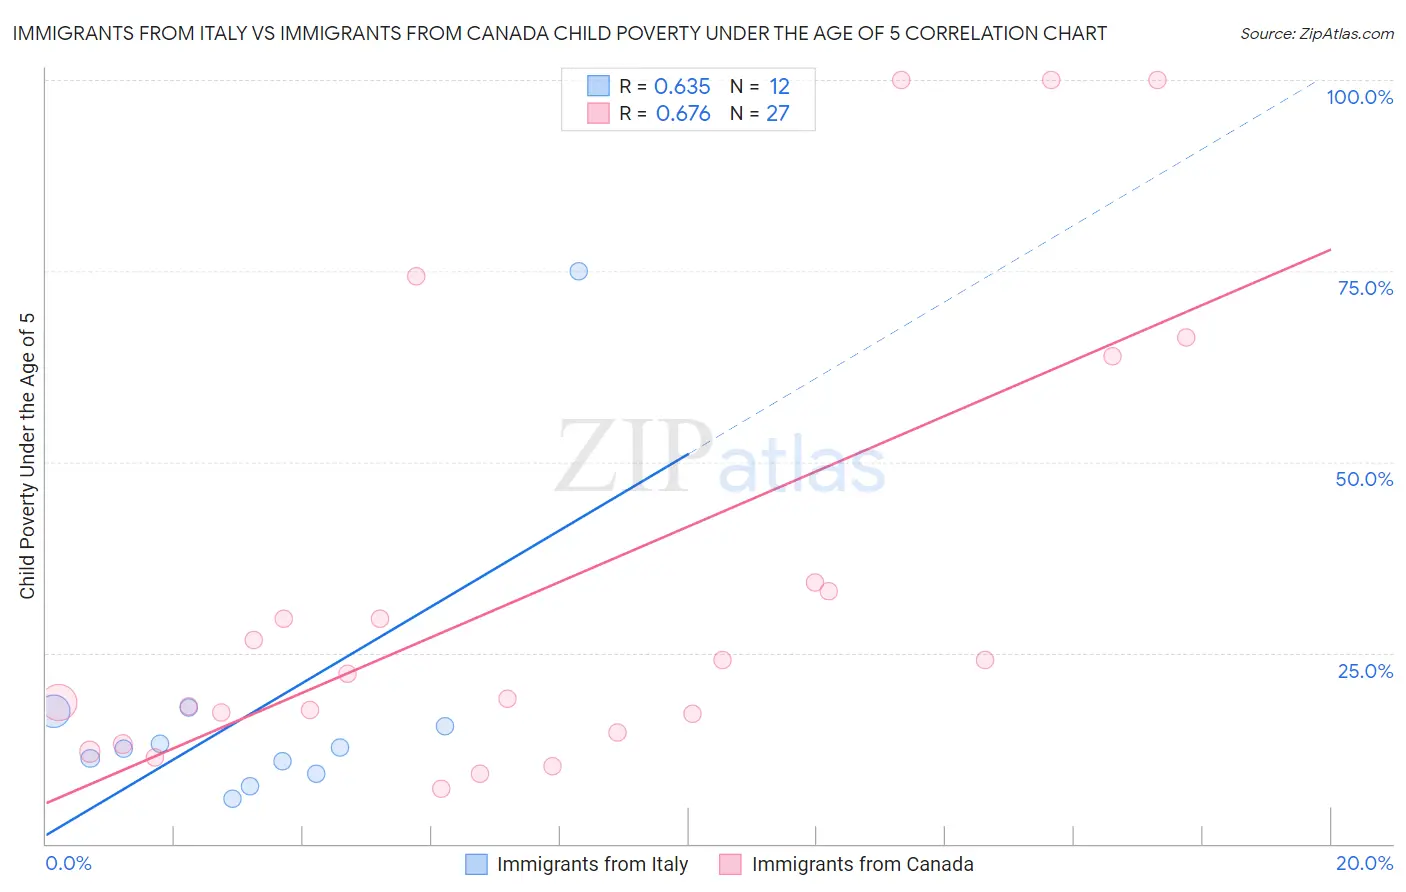 Immigrants from Italy vs Immigrants from Canada Child Poverty Under the Age of 5